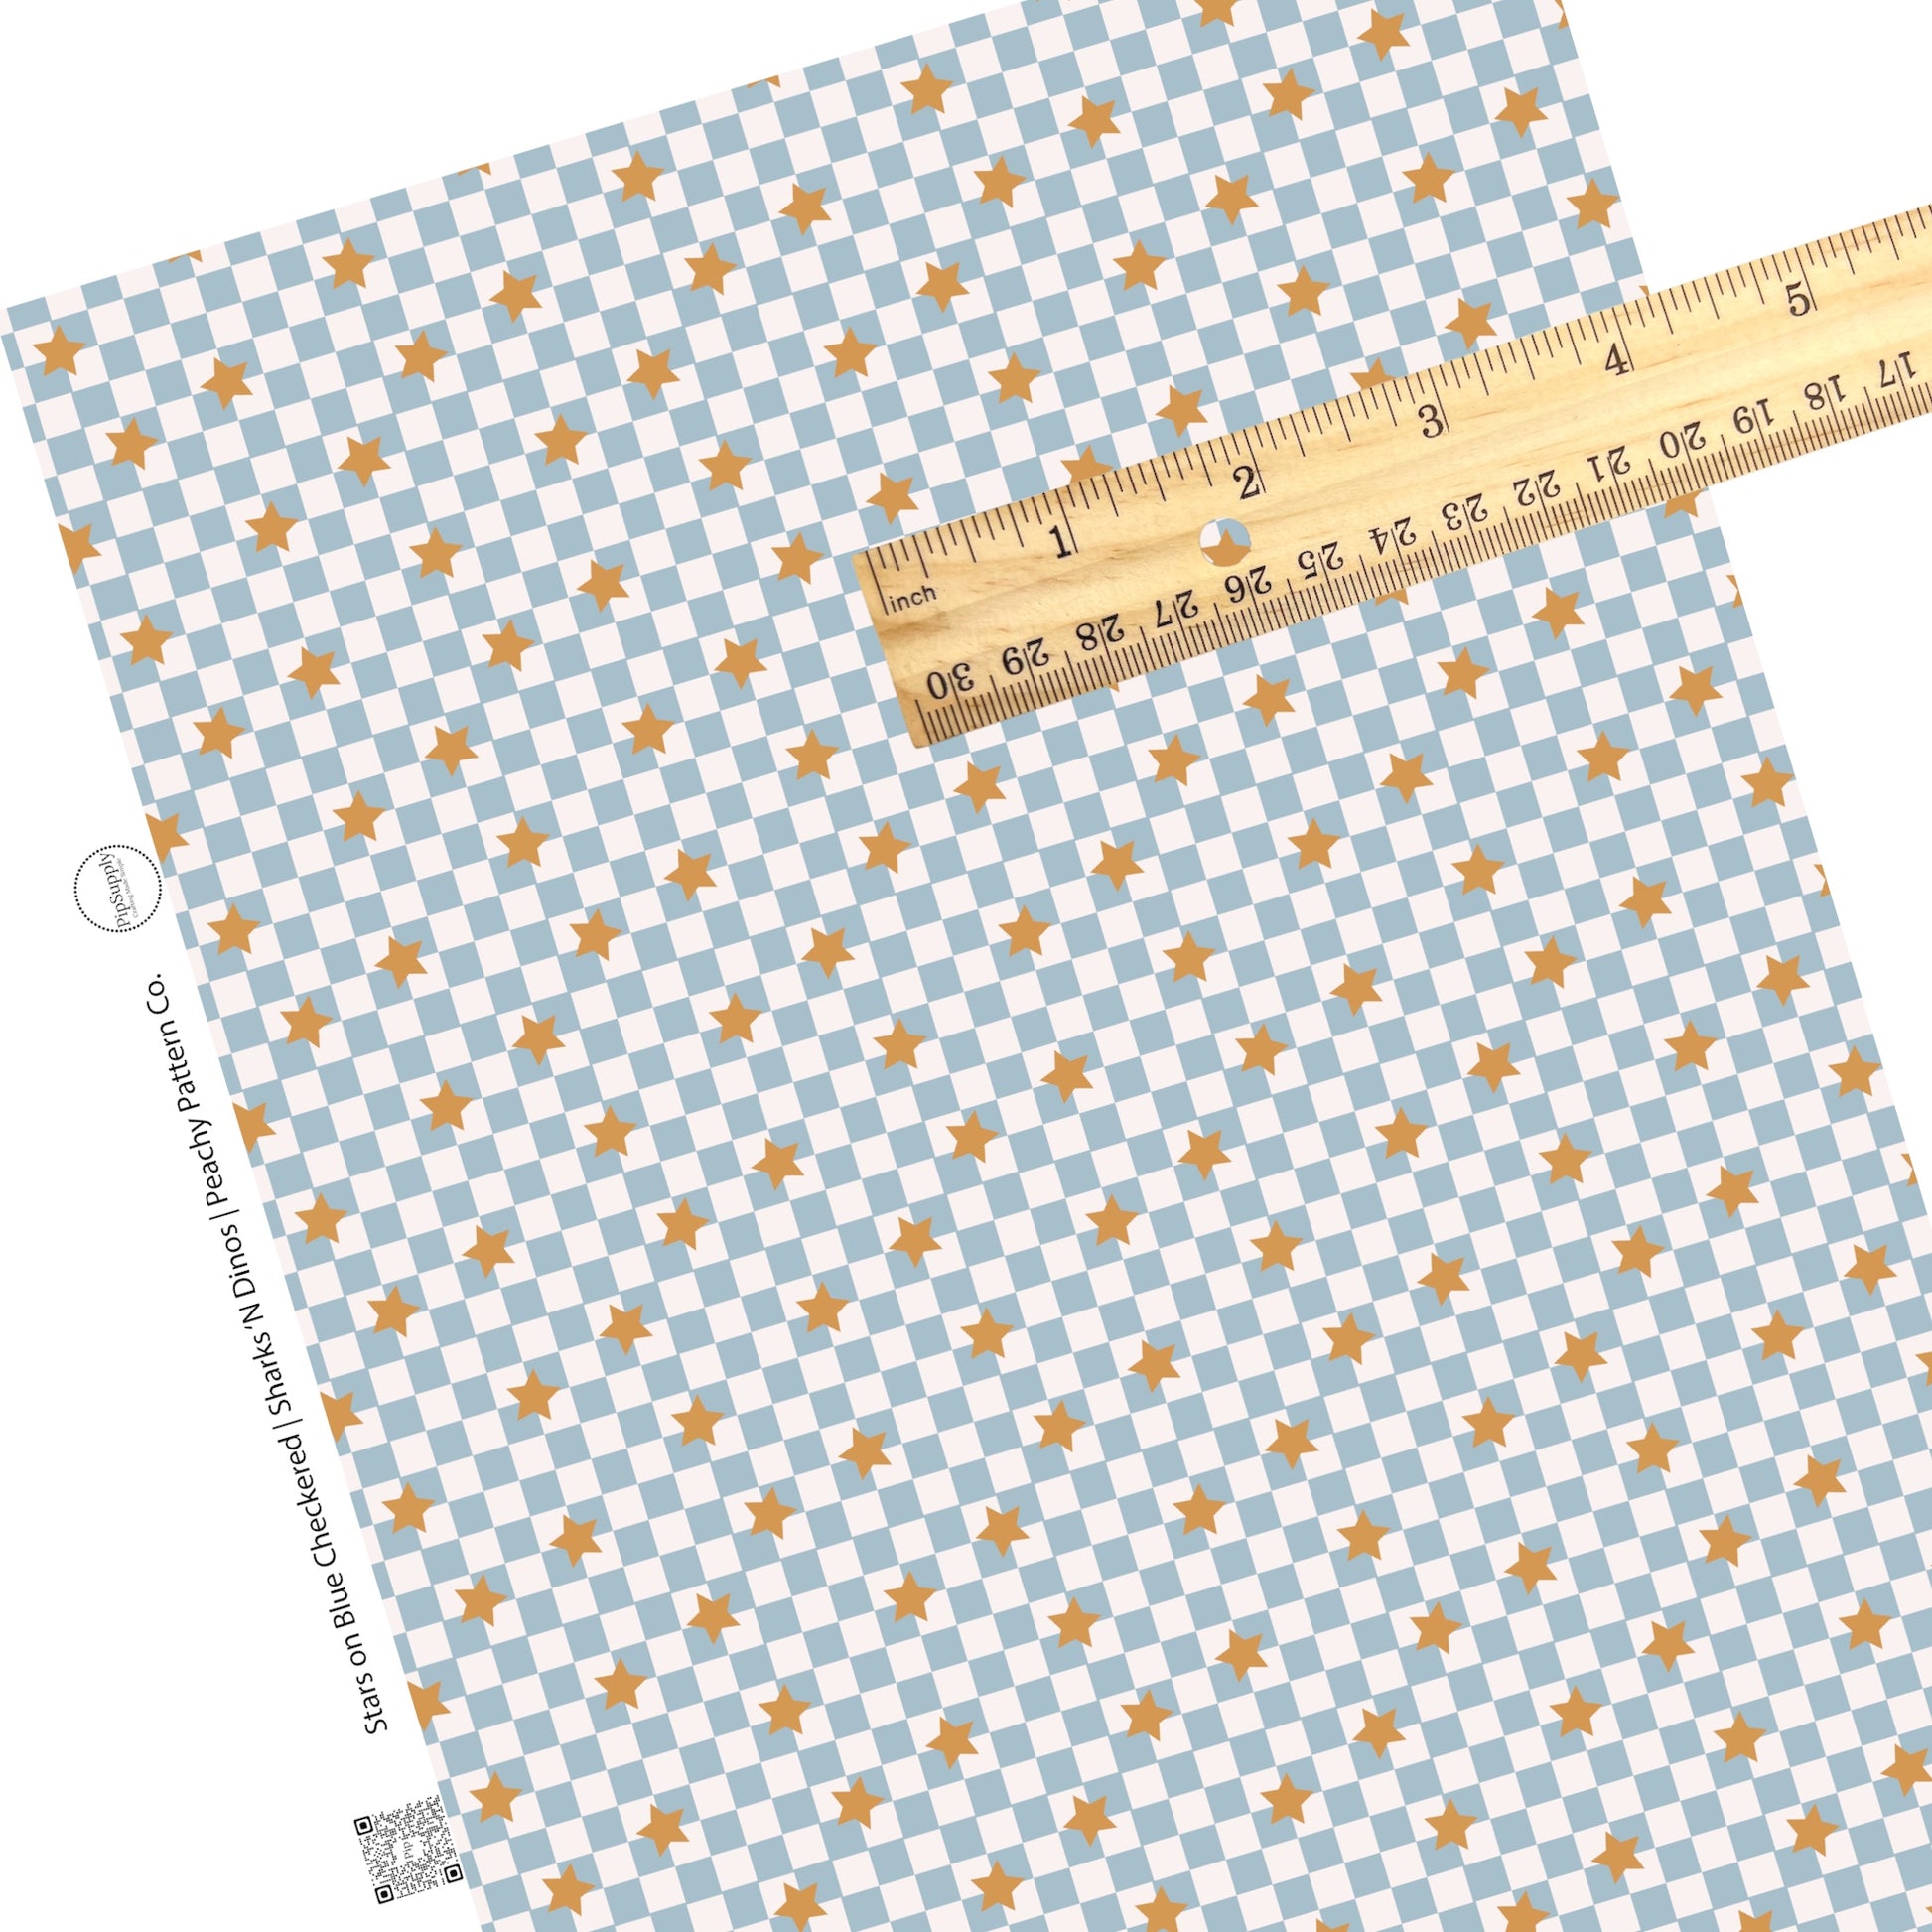 Gold stars on blue and white checker faux leather sheets